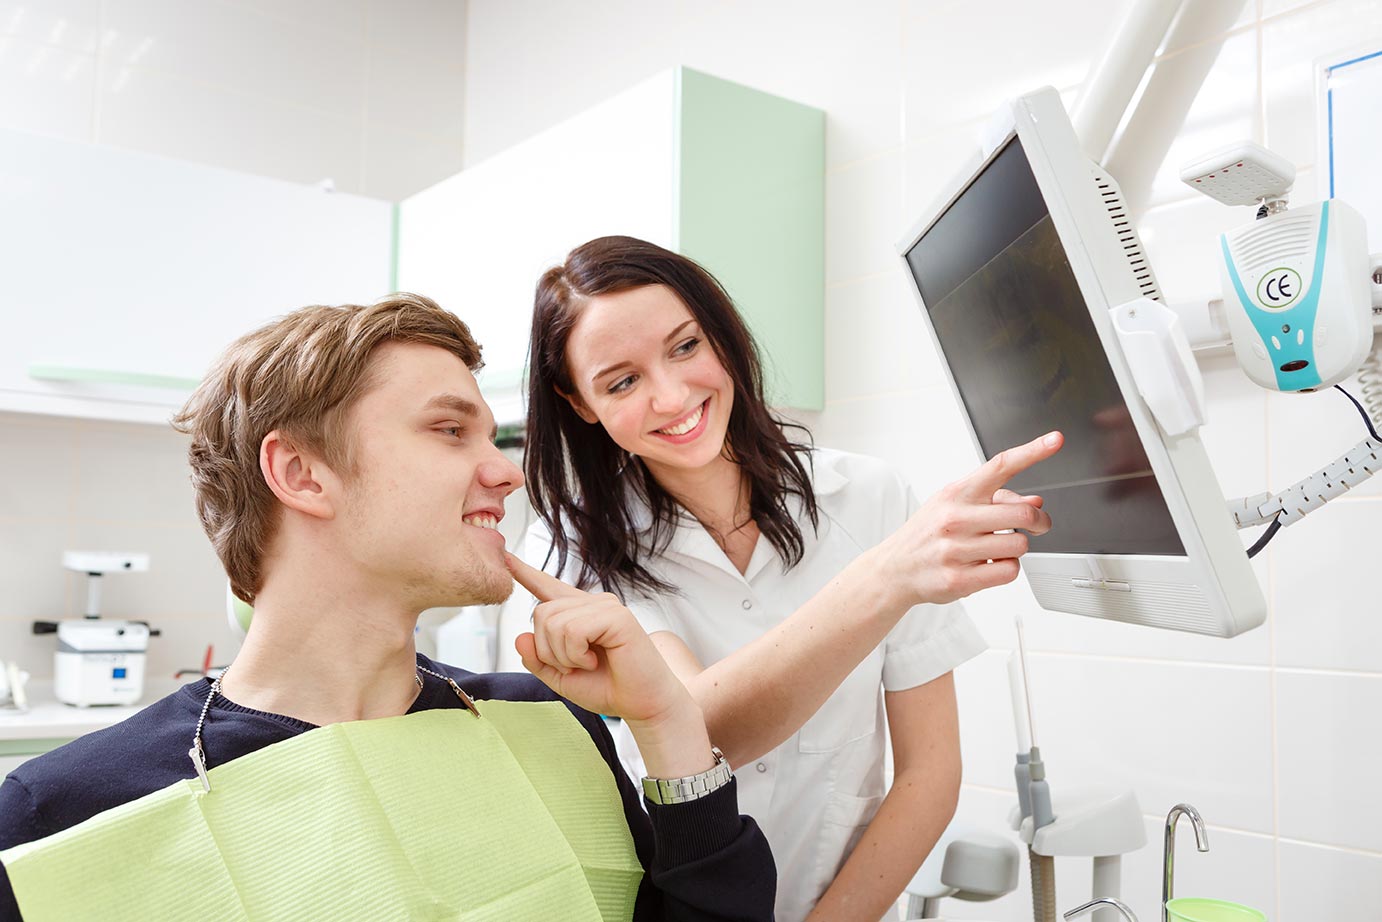 A dental hygienist reviews a dental scan with her patient, a young man in a blue shirt.